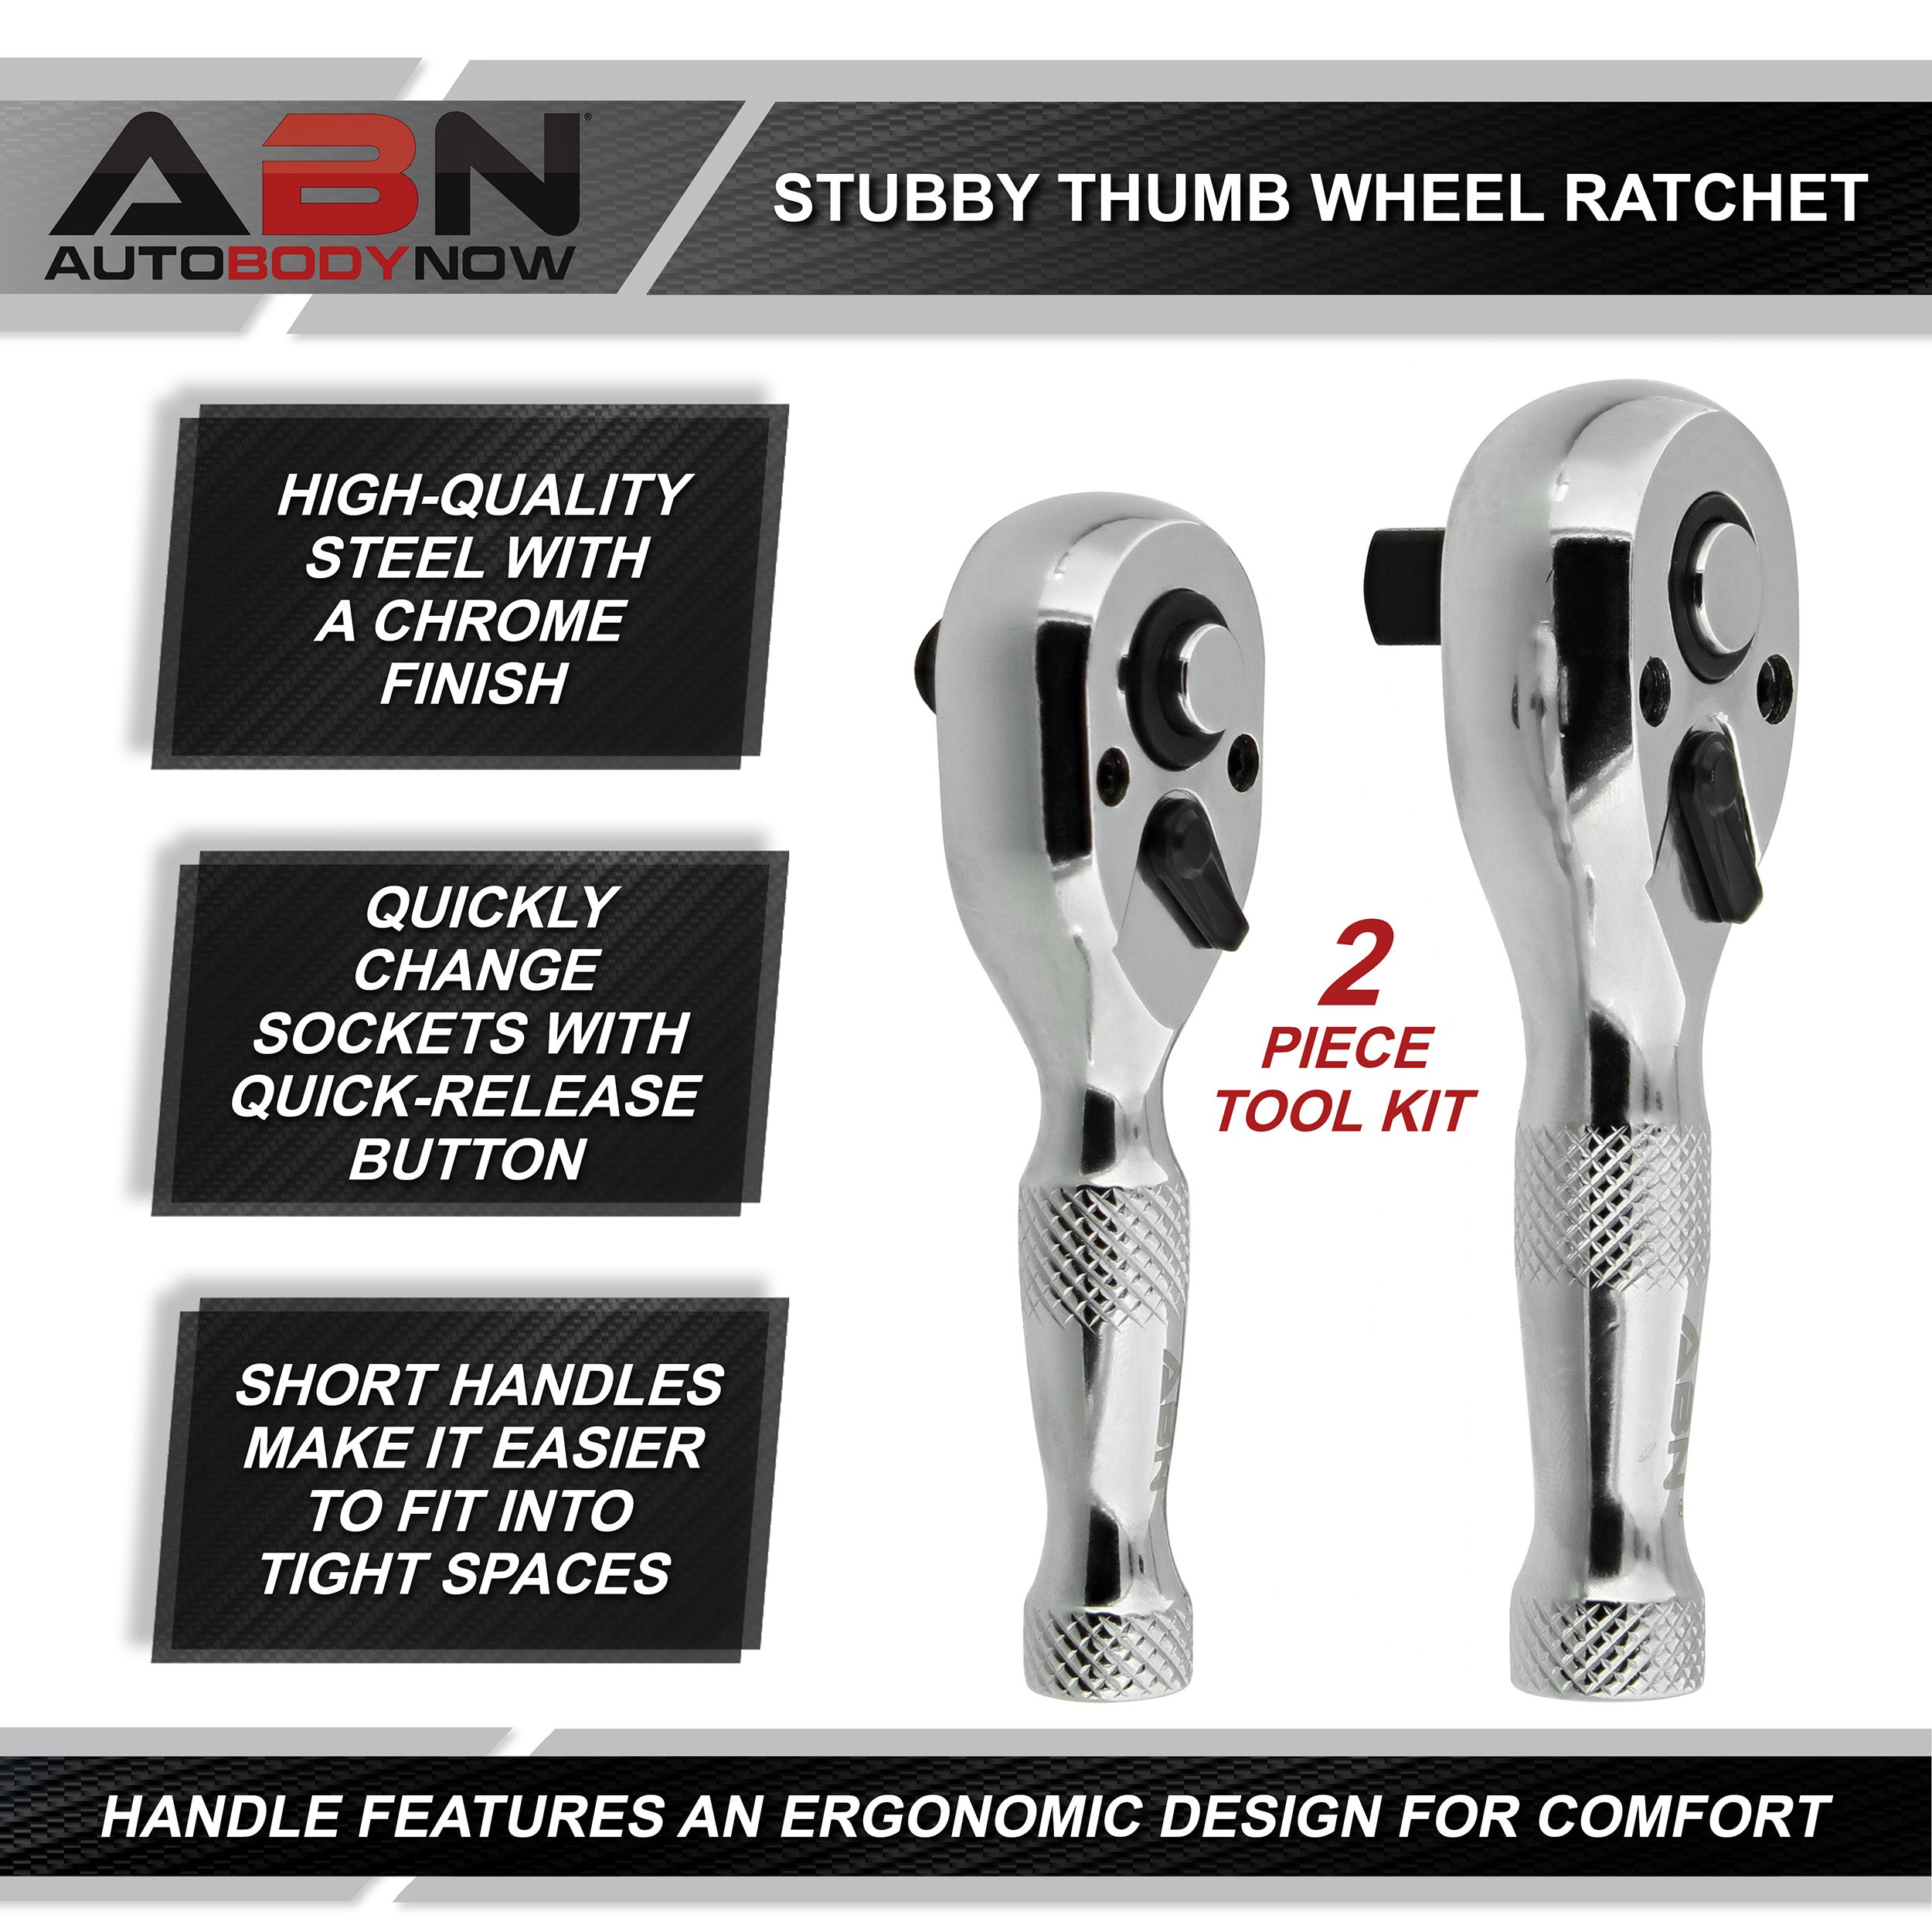 2pc Stubby Ratchet Wrench Tool 1/4 and 3/8in Drive Thumb Wheel Ratchet